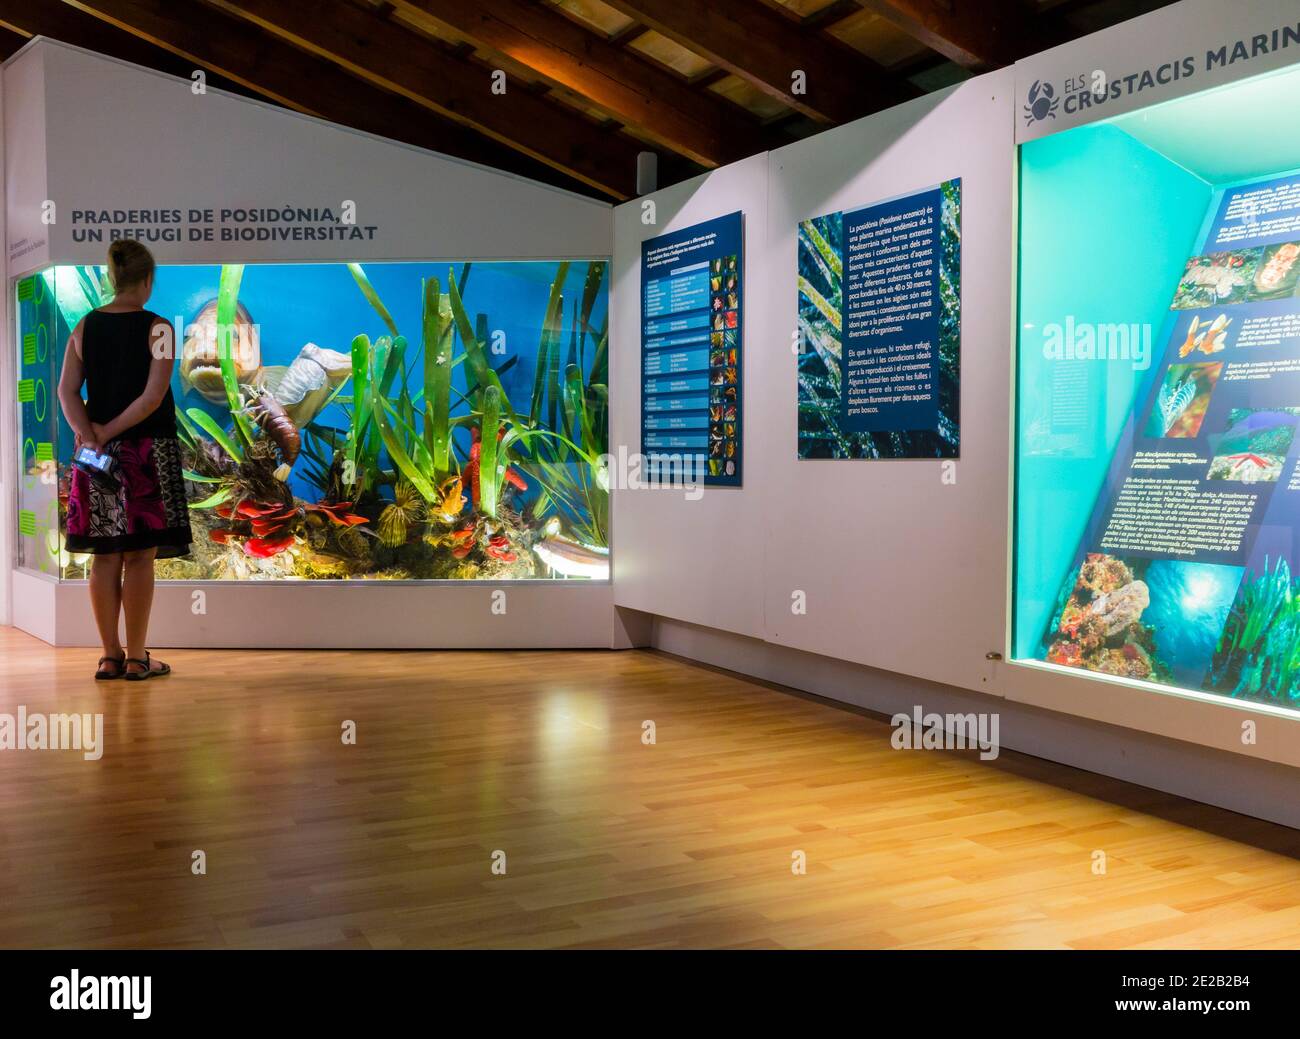 Interior view of exhibits in the Museu Balear de Ciencies Naturals or Natural Science Museum in Soller Mallorca Balearic Islands Spain. Stock Photo